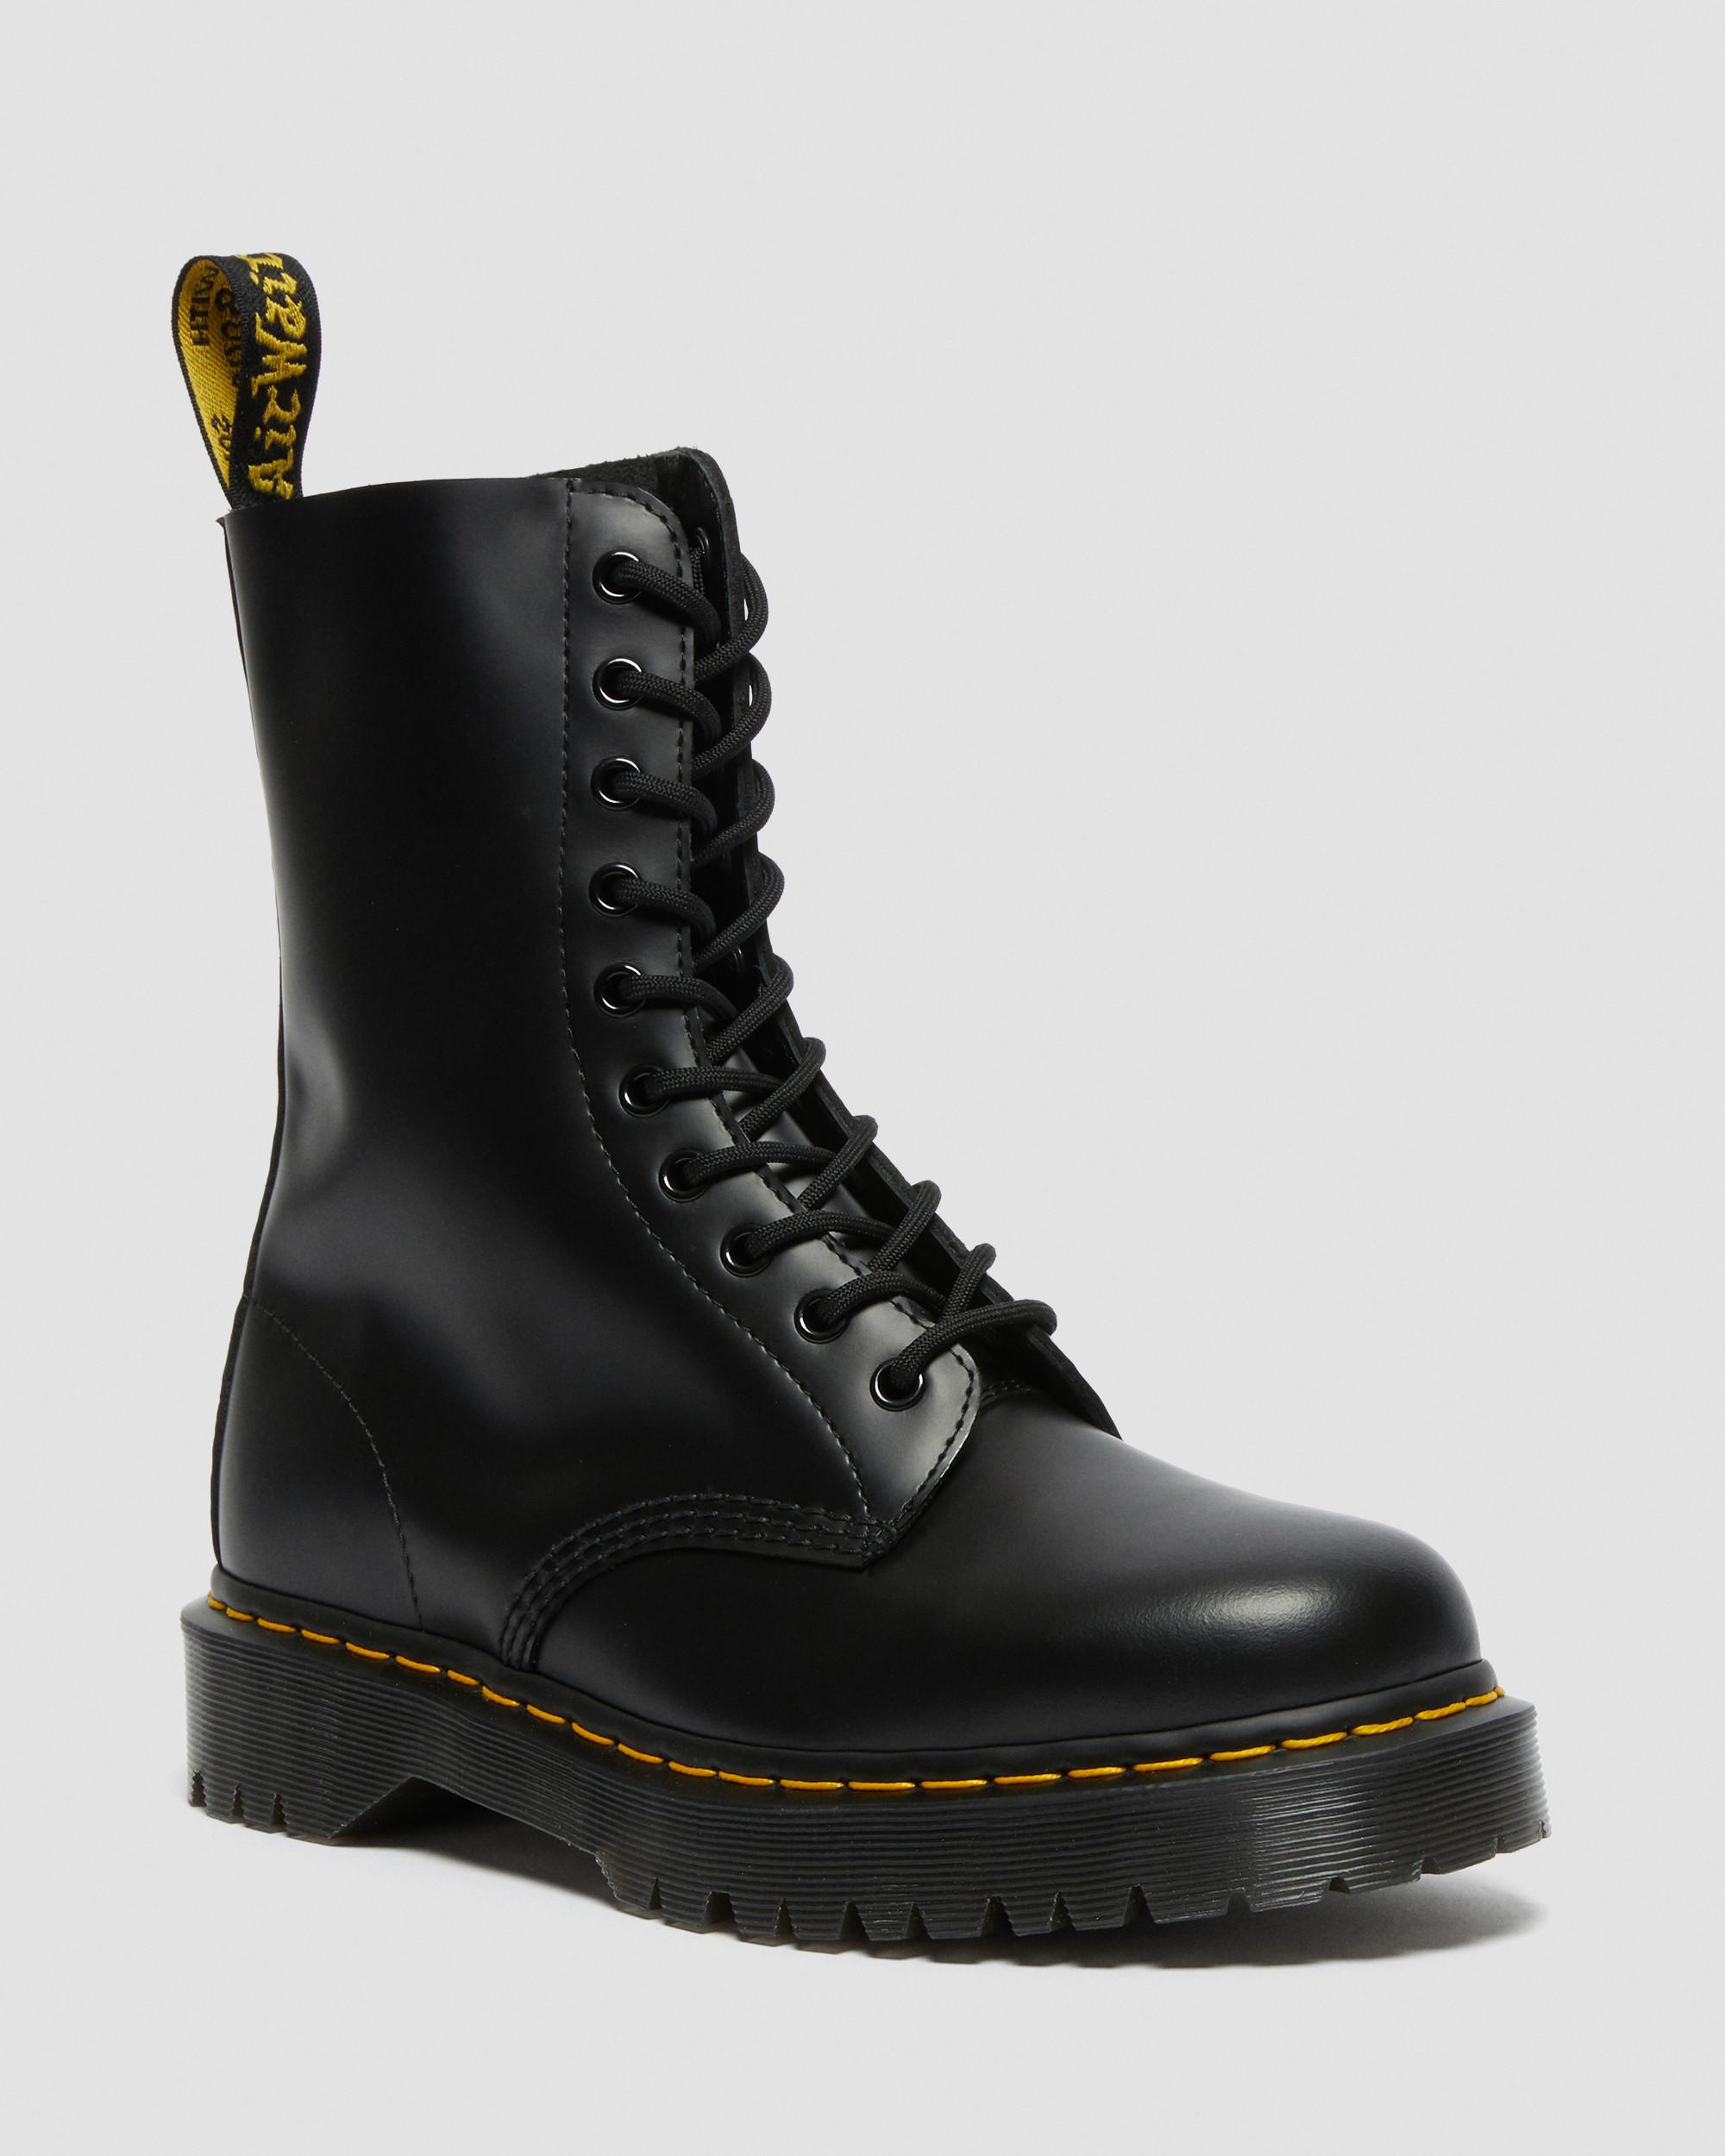 who sells dr martens in store